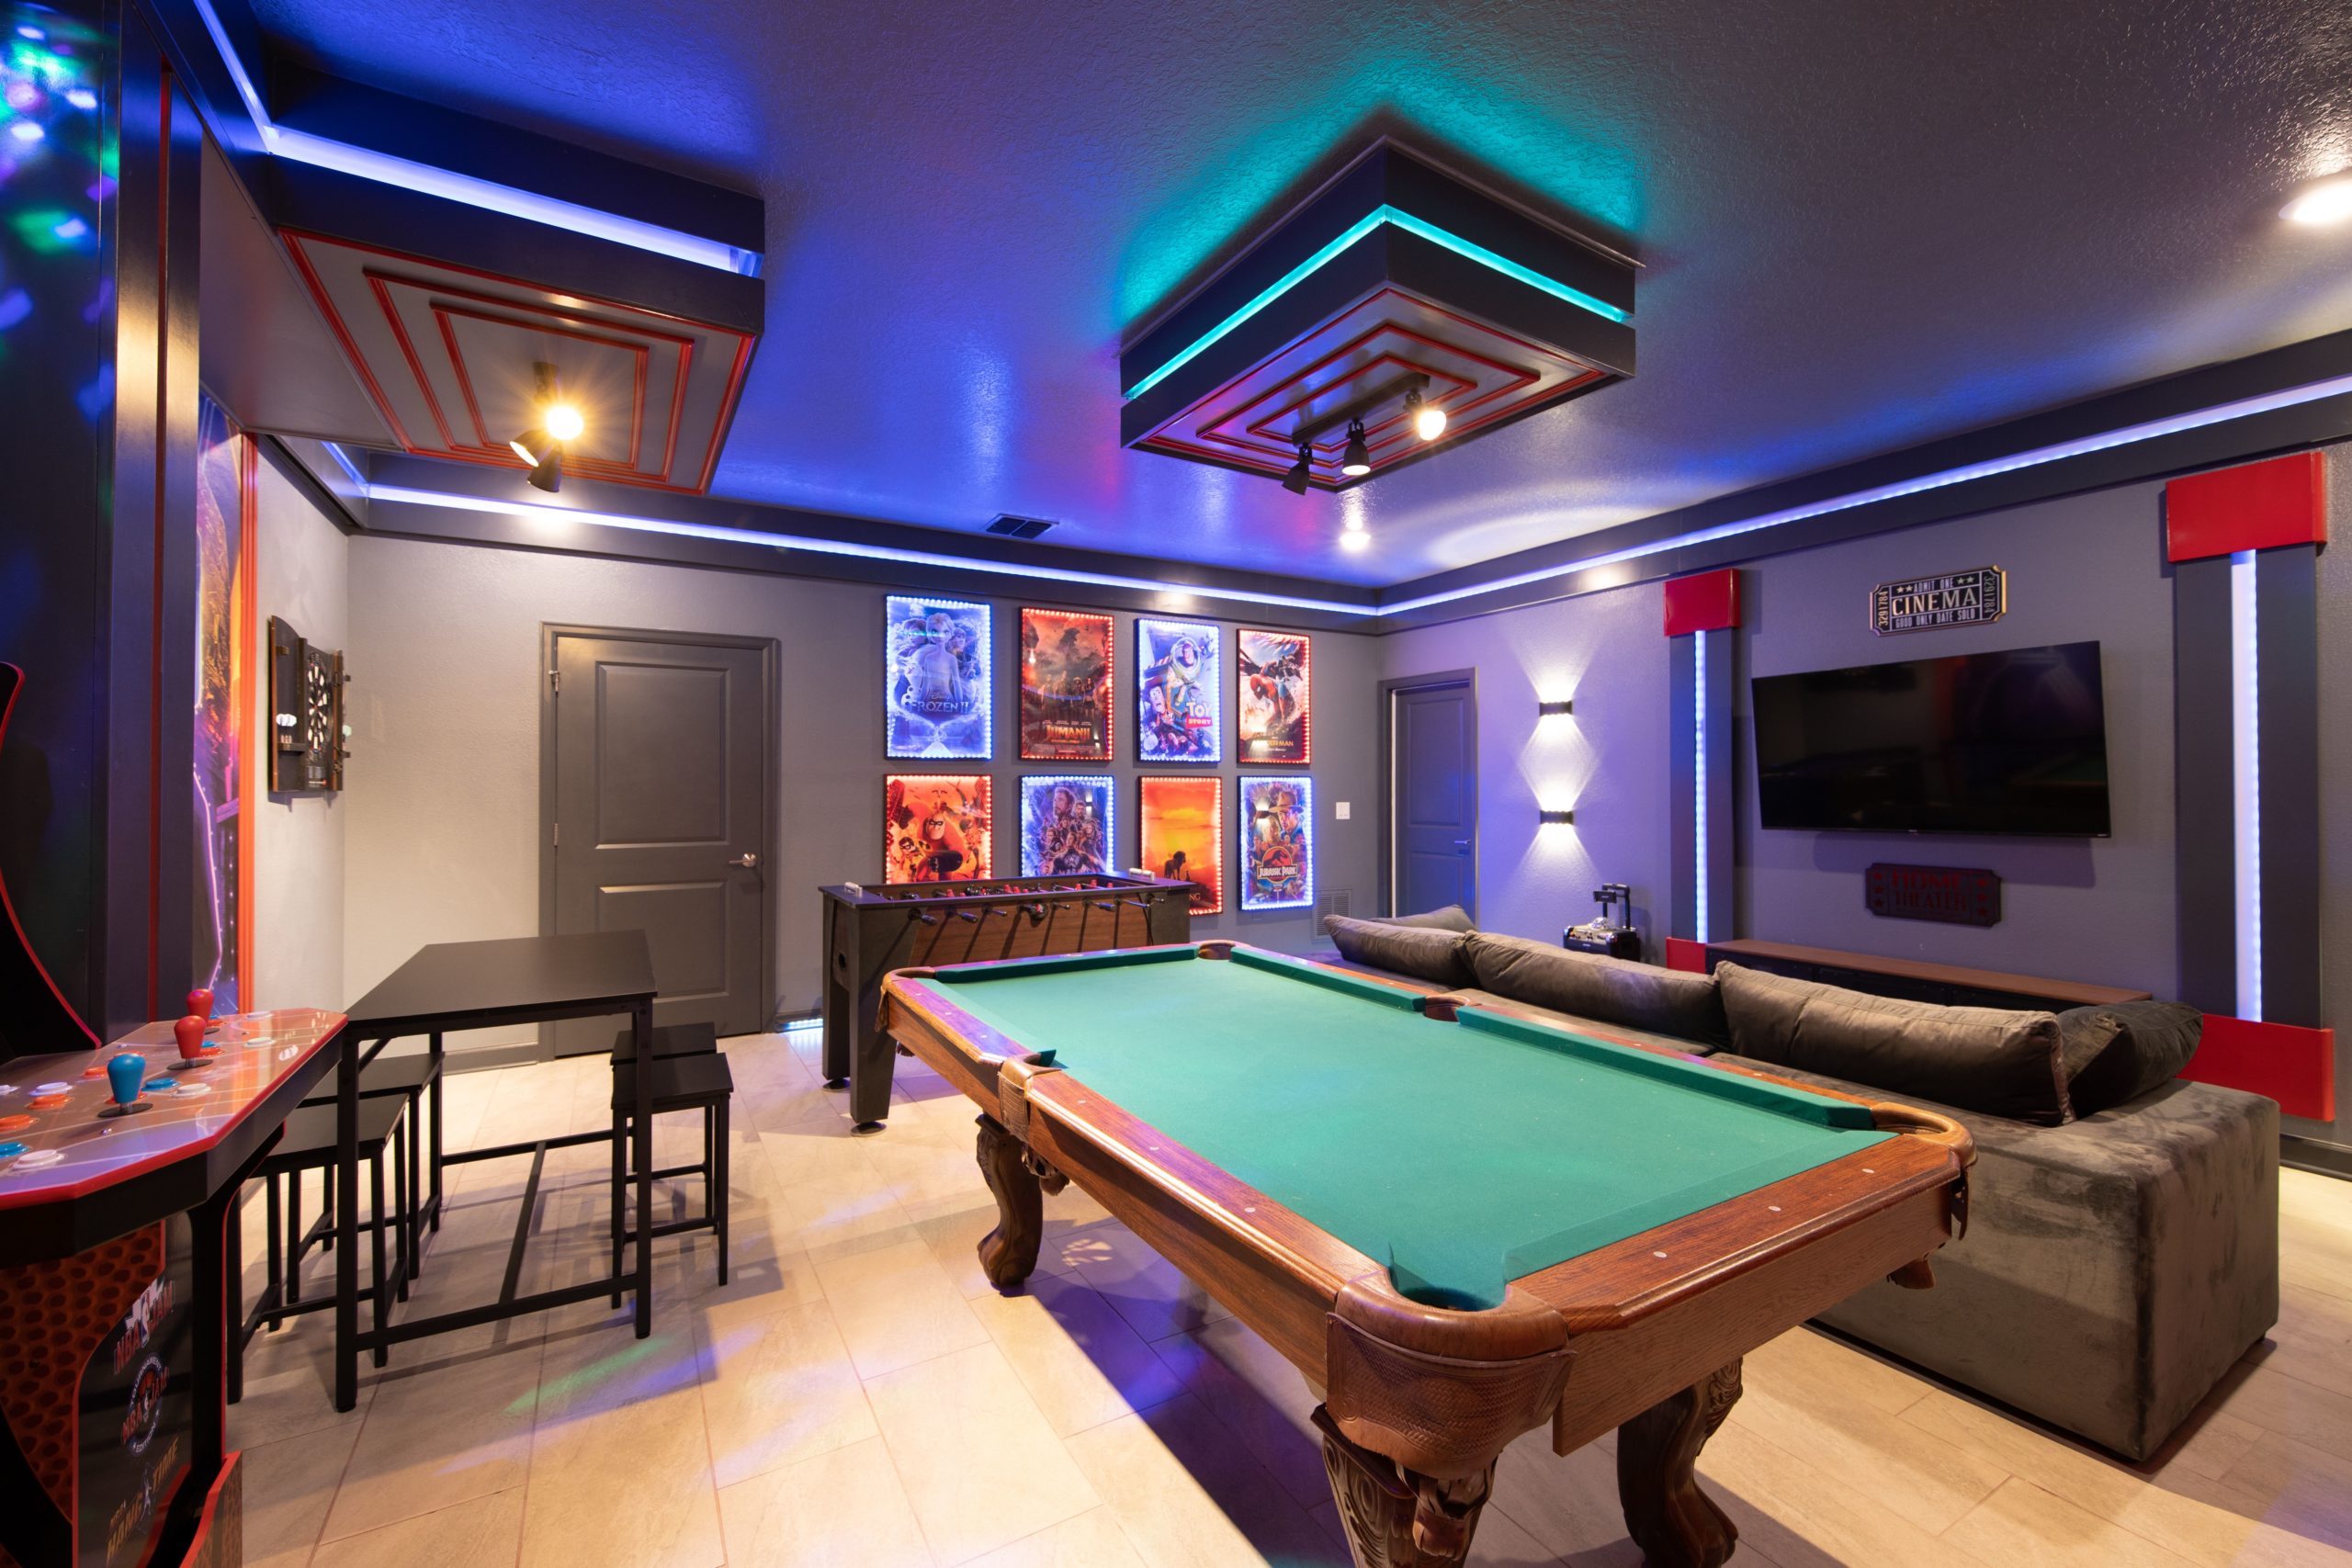 The game room in one of our orlando vacation rentals